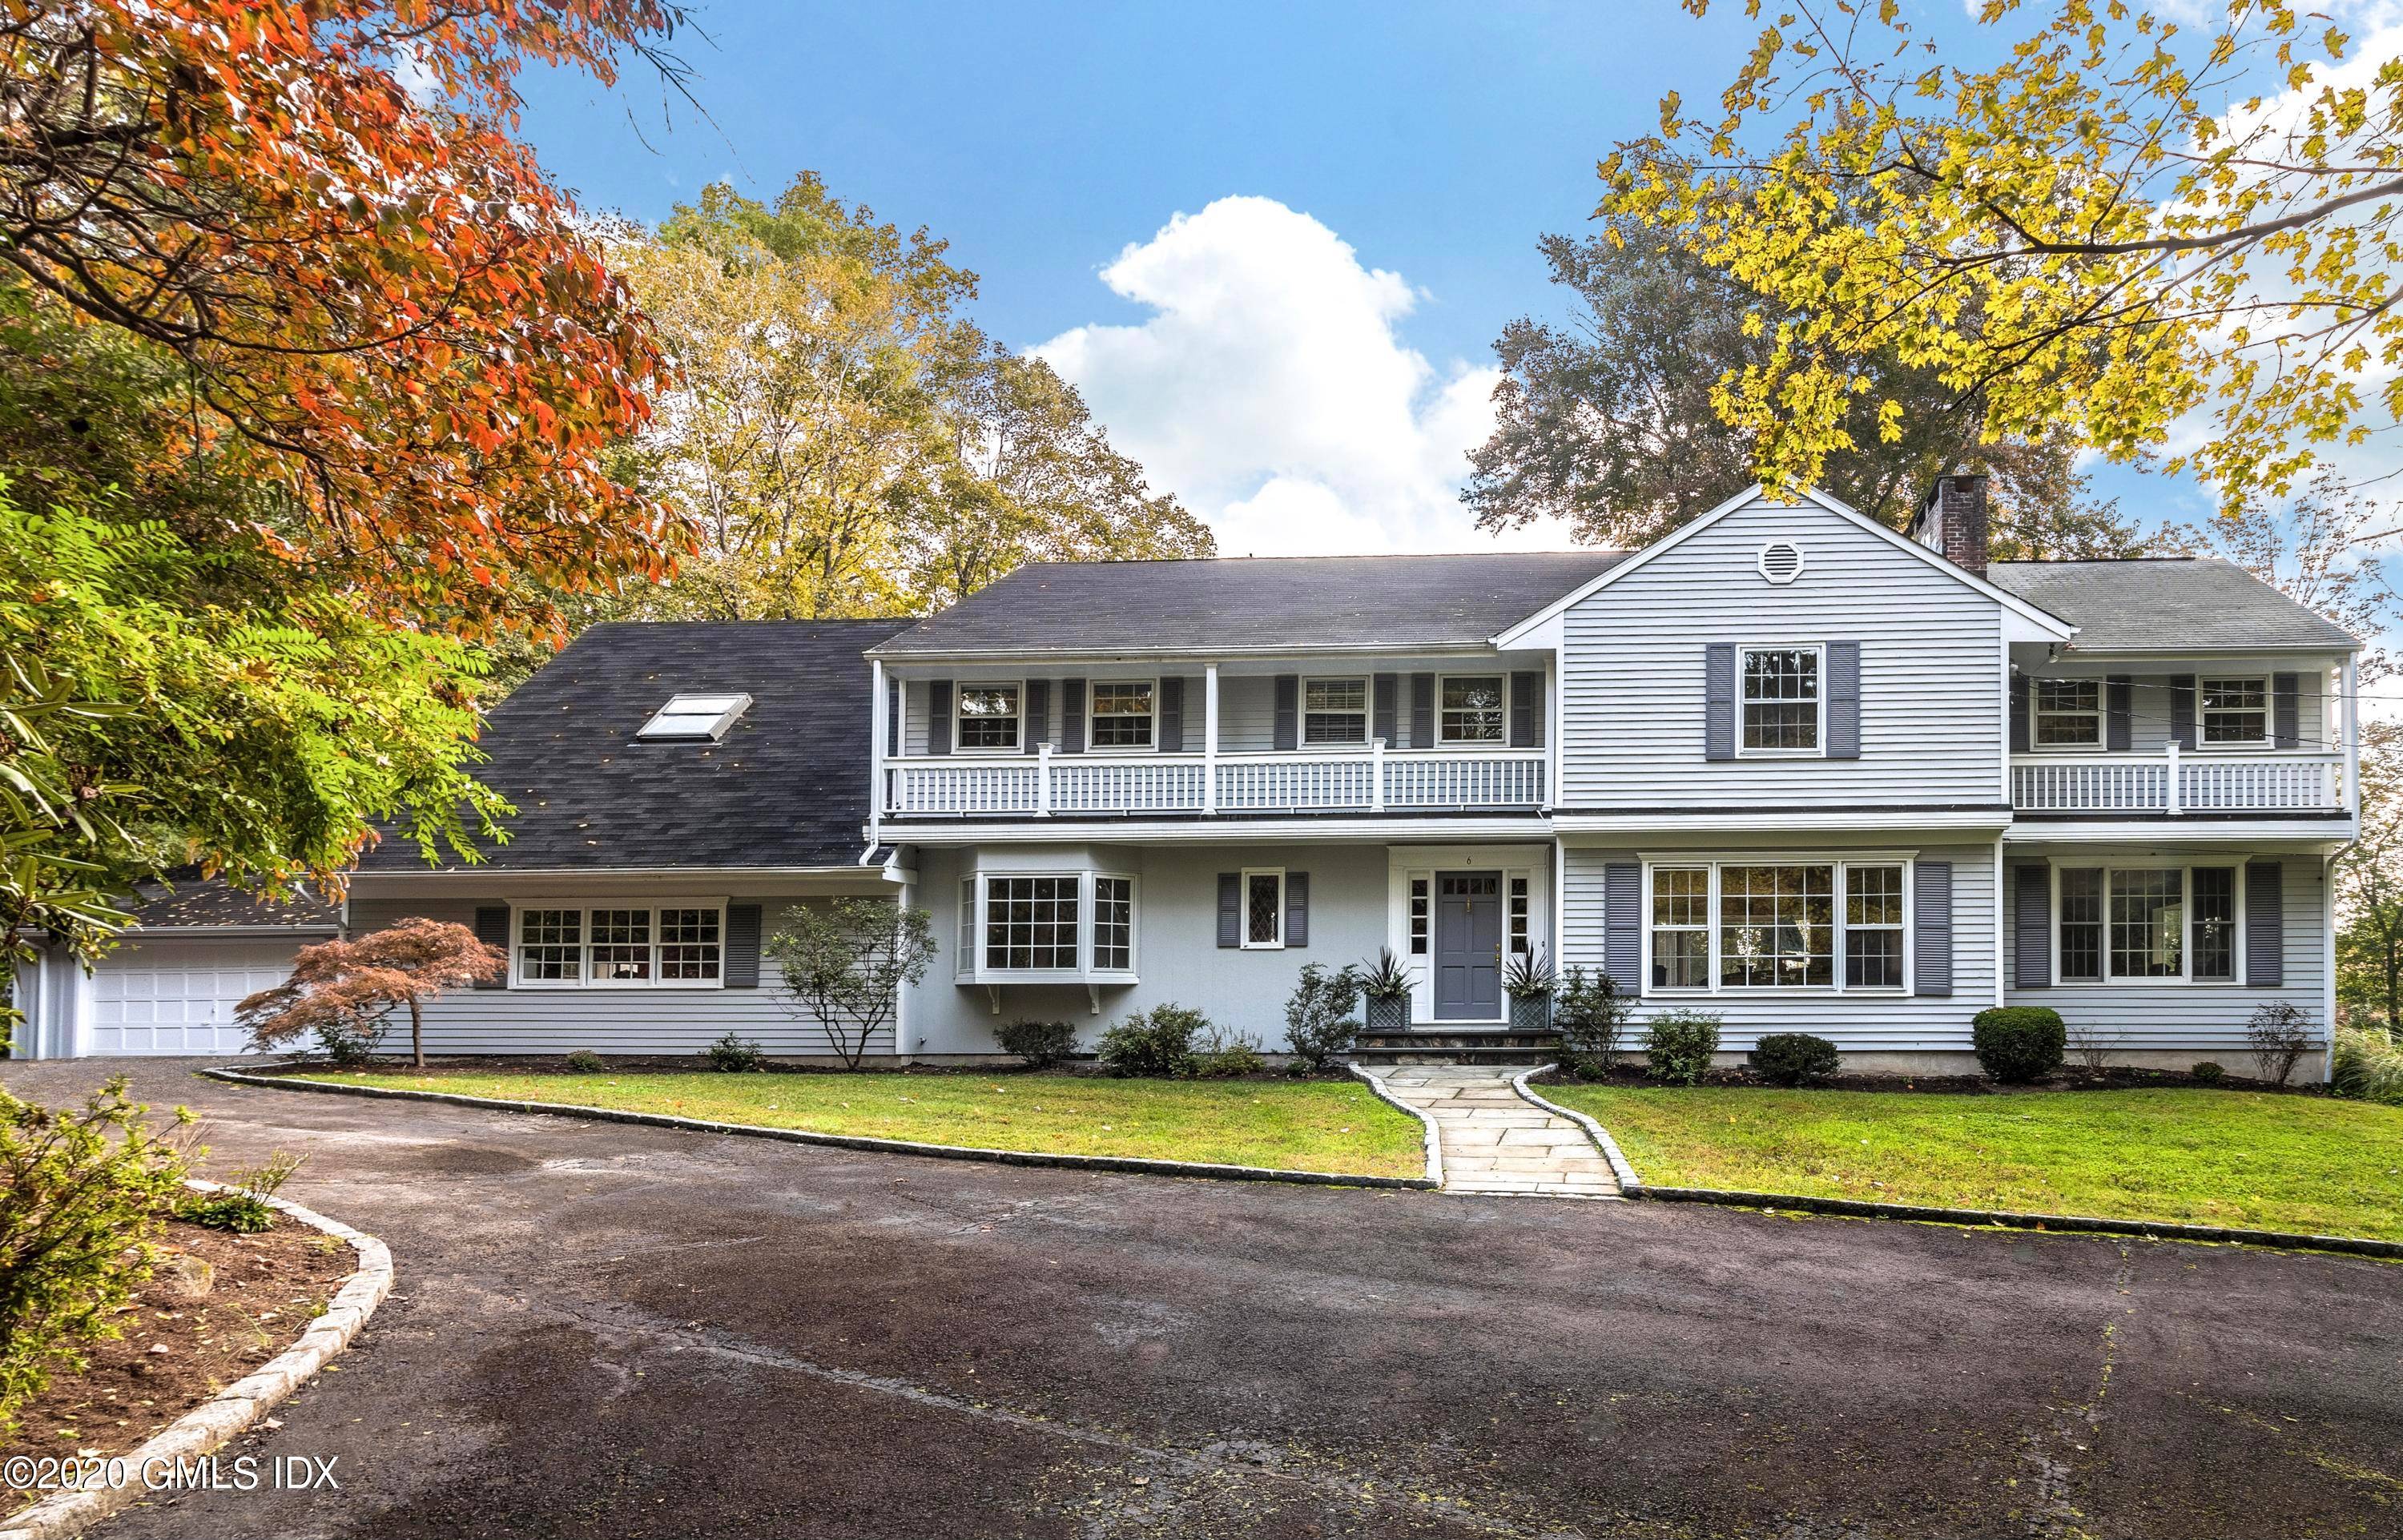 Spacious sunlit colonial, on a quiet cul de sac in the heart of mid country.